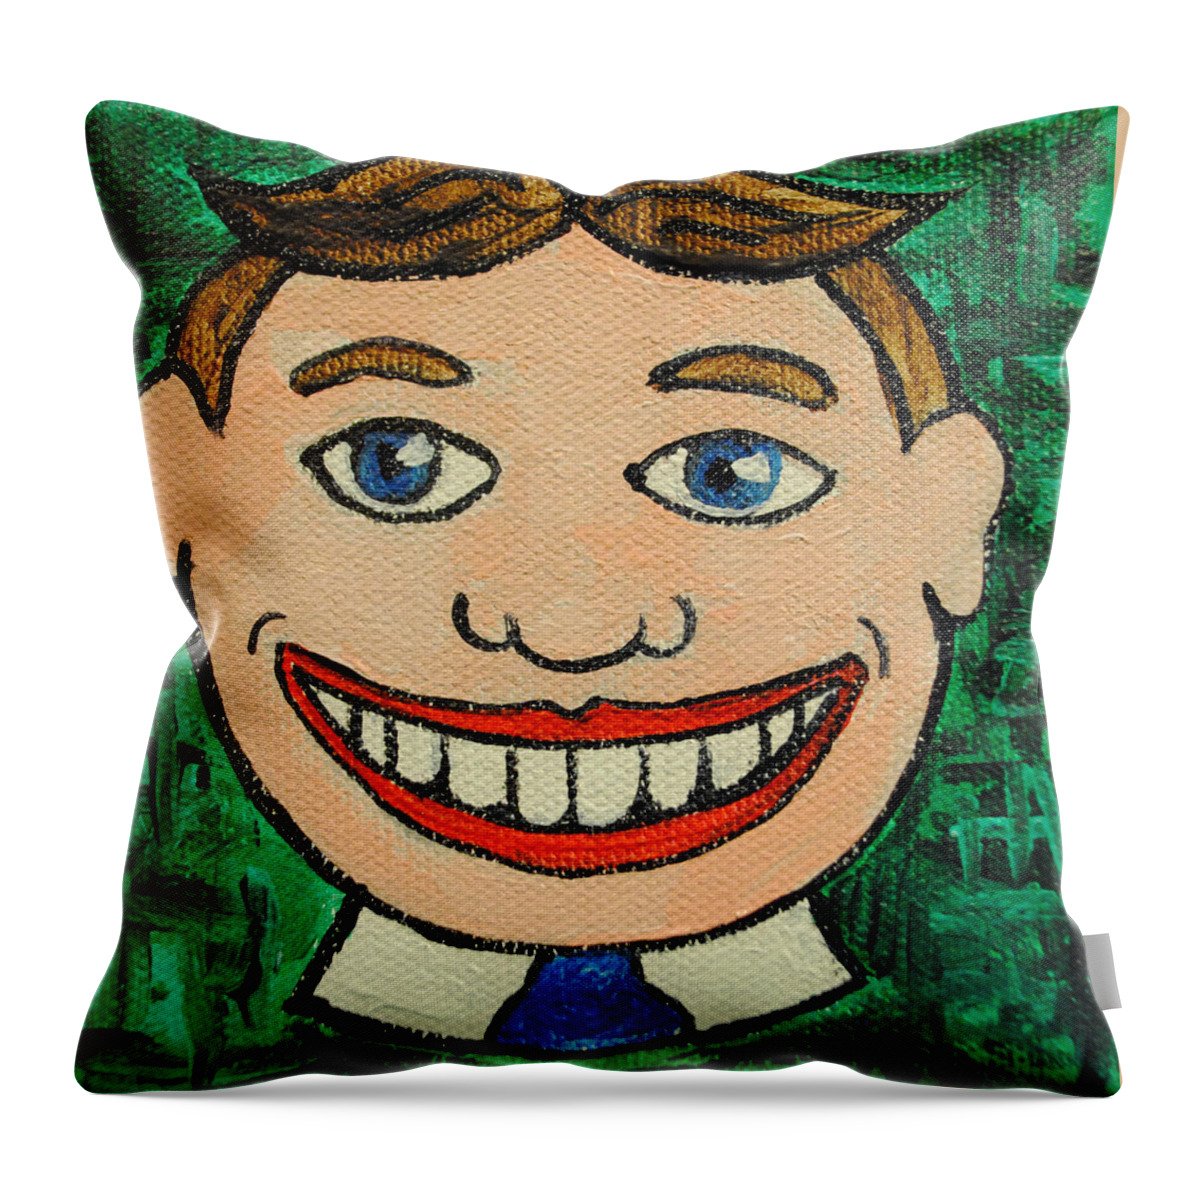 Asbury Park Throw Pillow featuring the painting Still Smiling by Patricia Arroyo